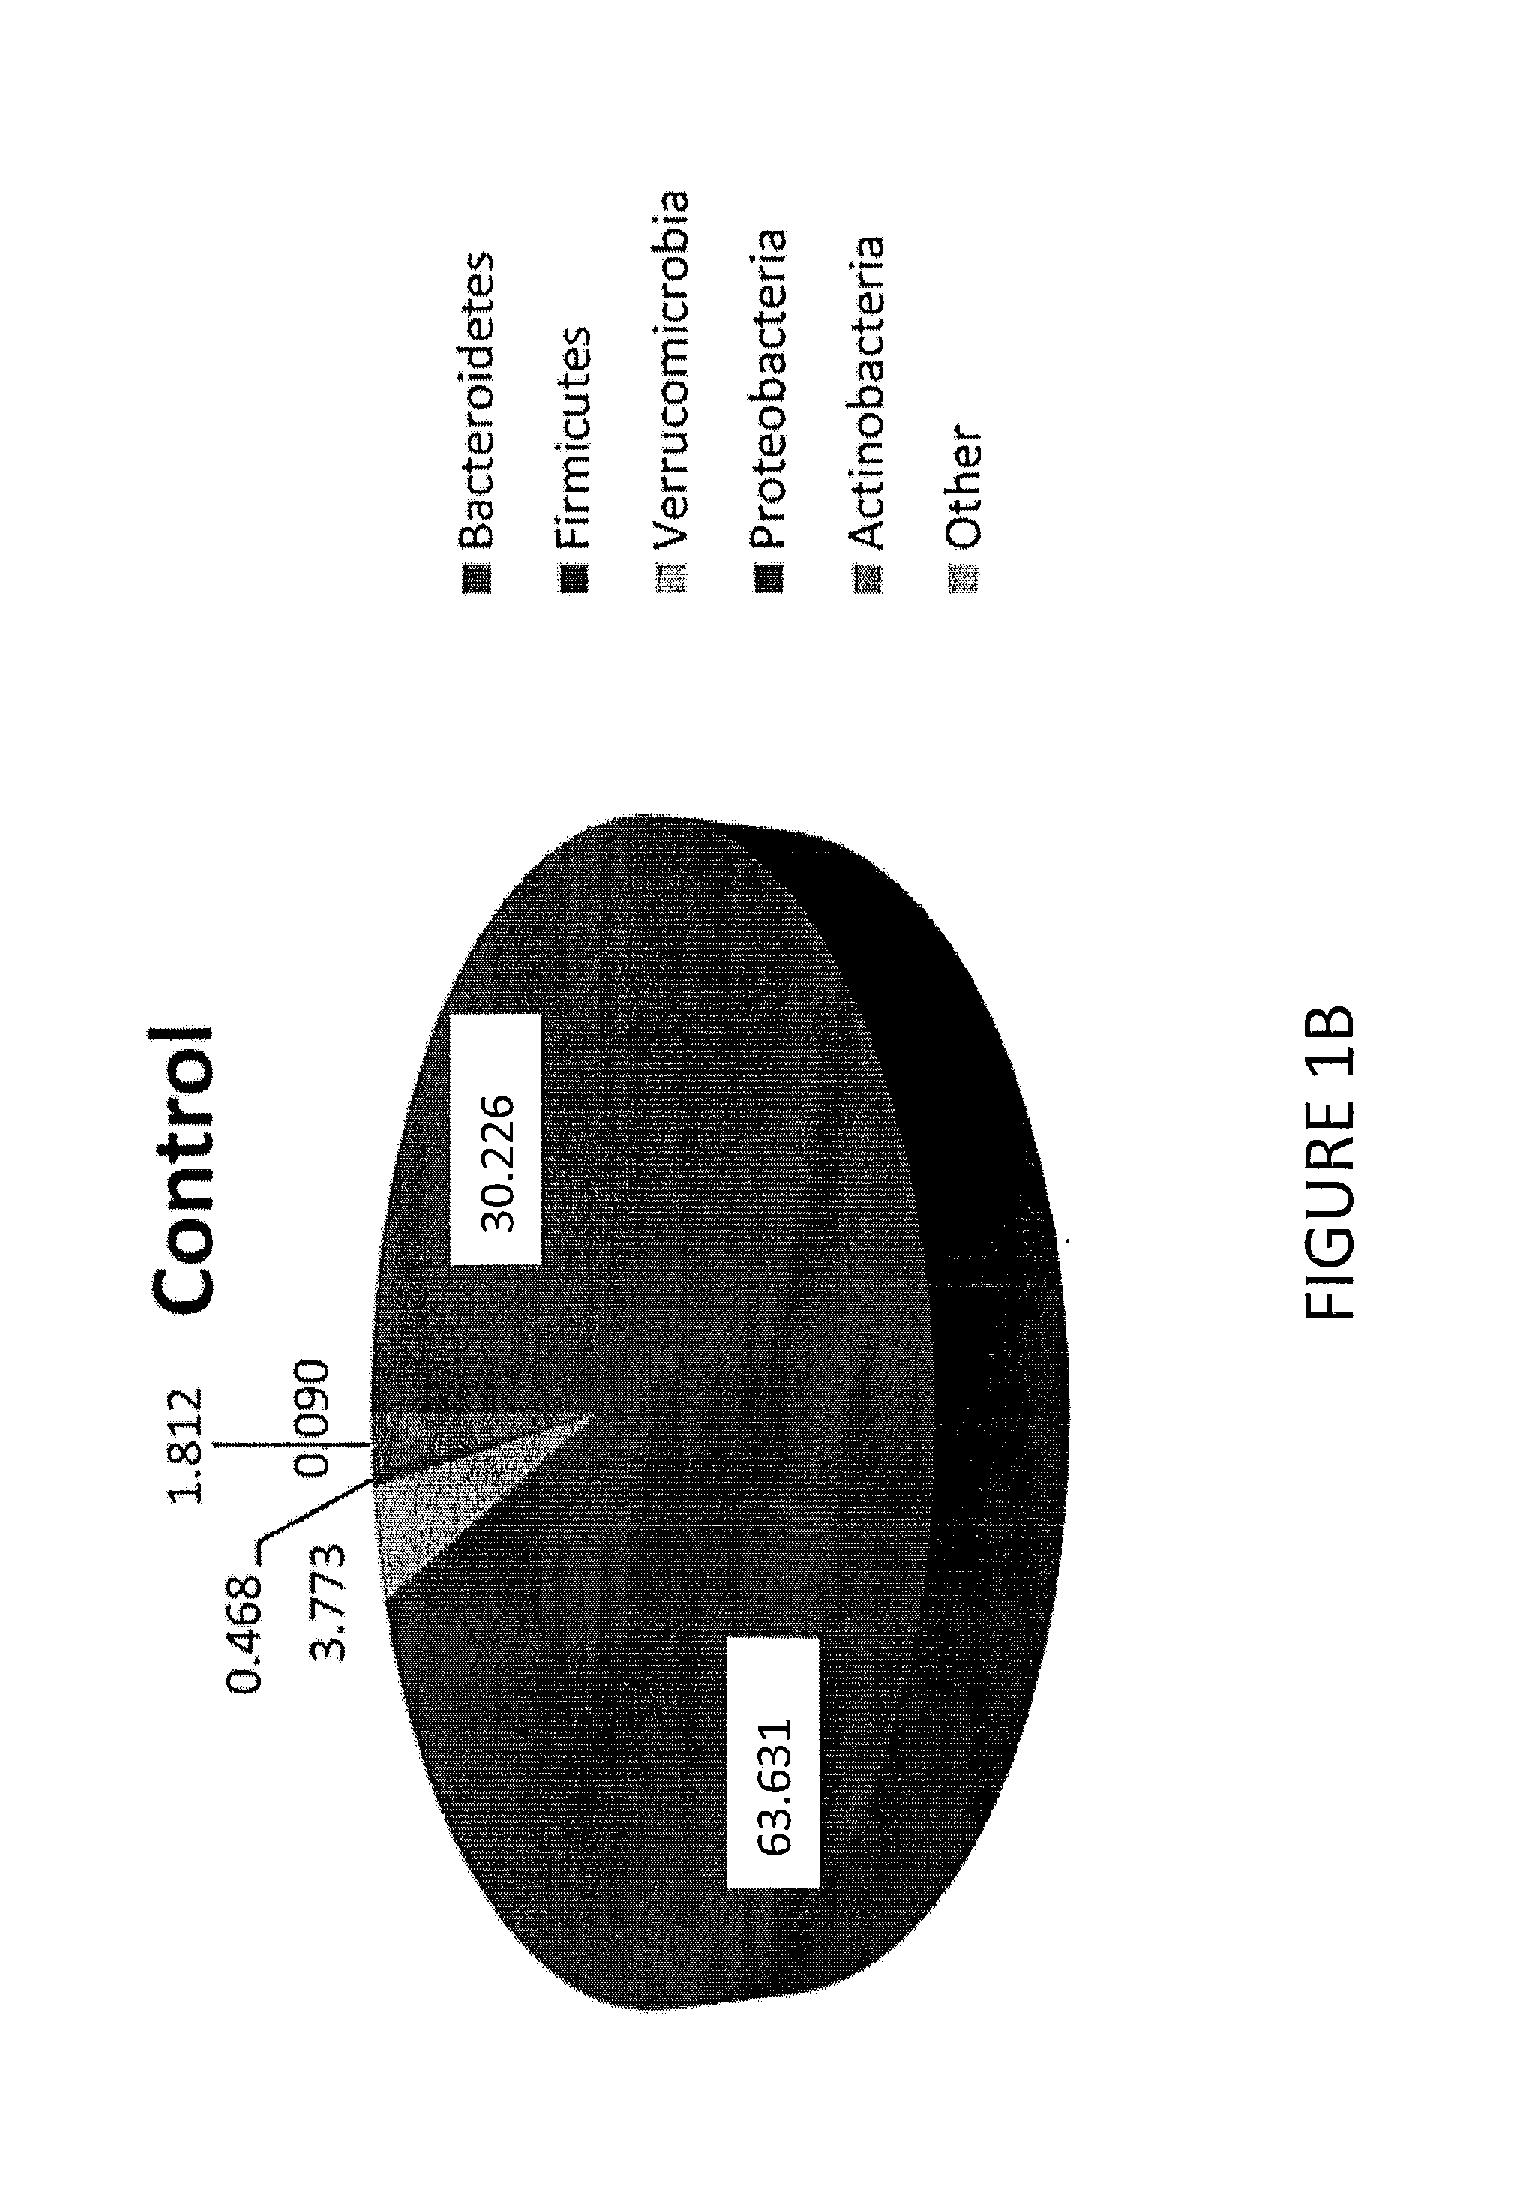 Method for diagnosing, preventing, and treating neurological diseases